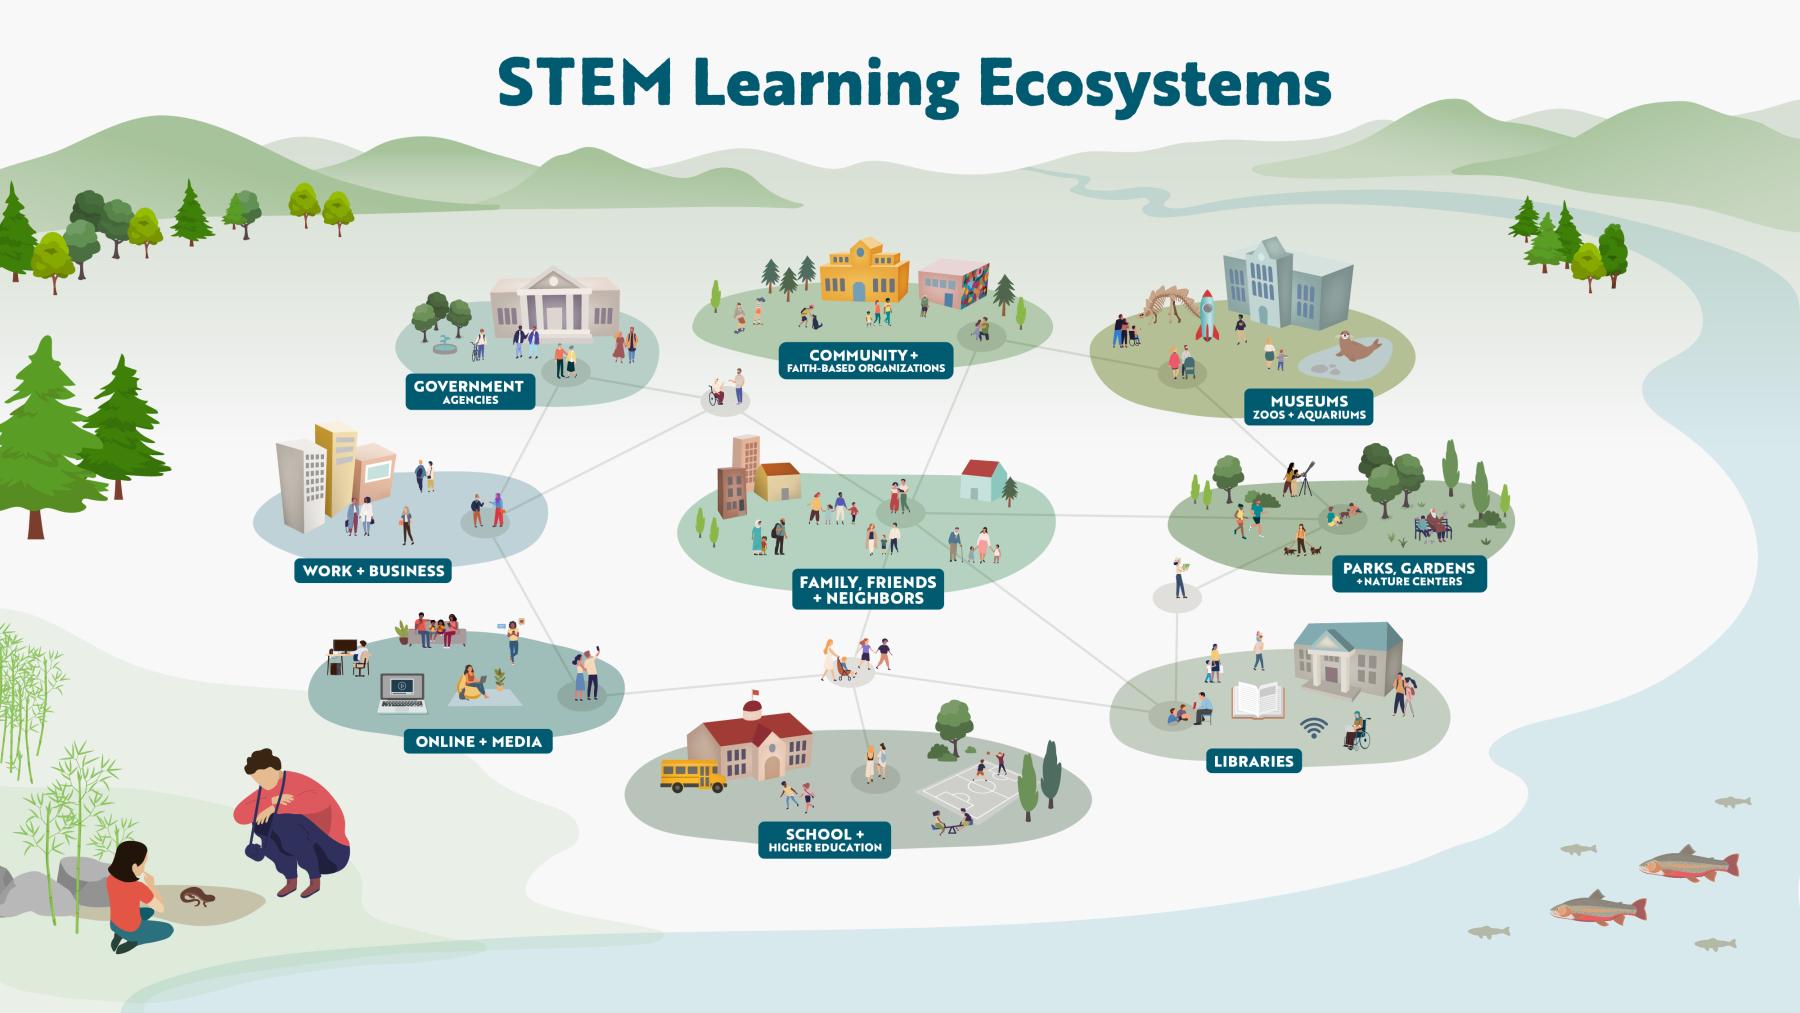 STEM Learning Ecosystem generalized example in context